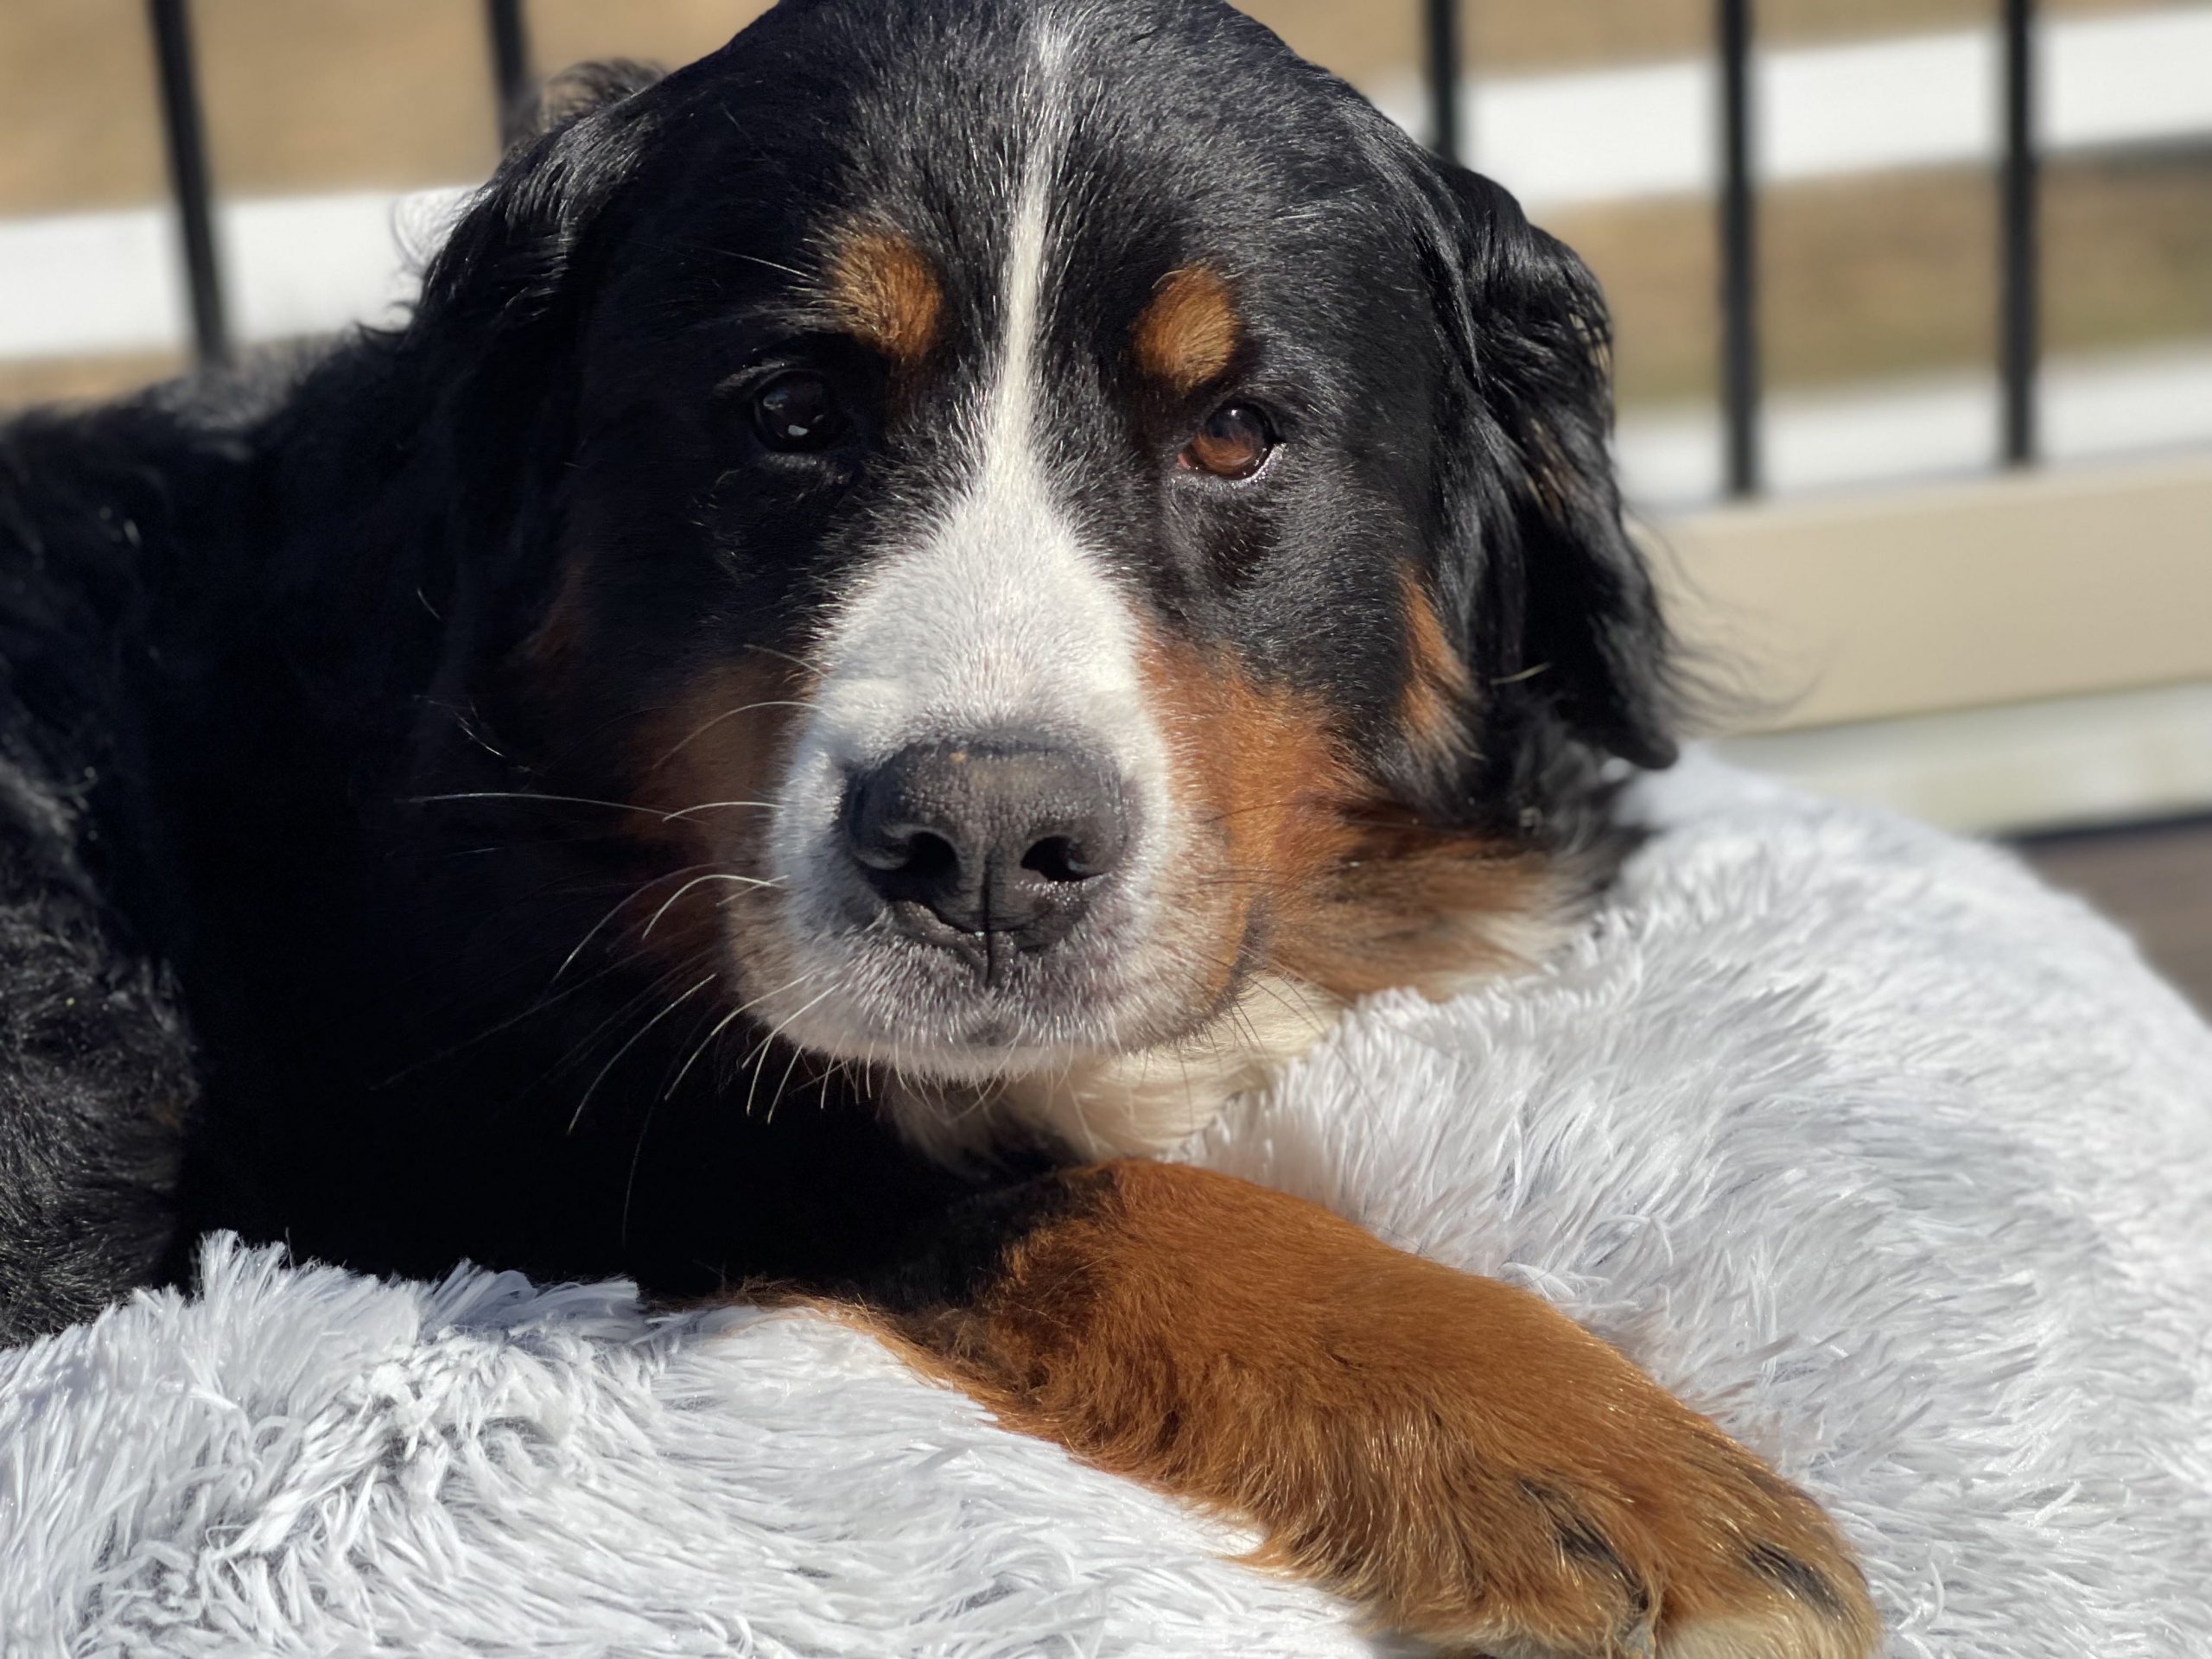 Bernese mountain dog on a grey dog bed